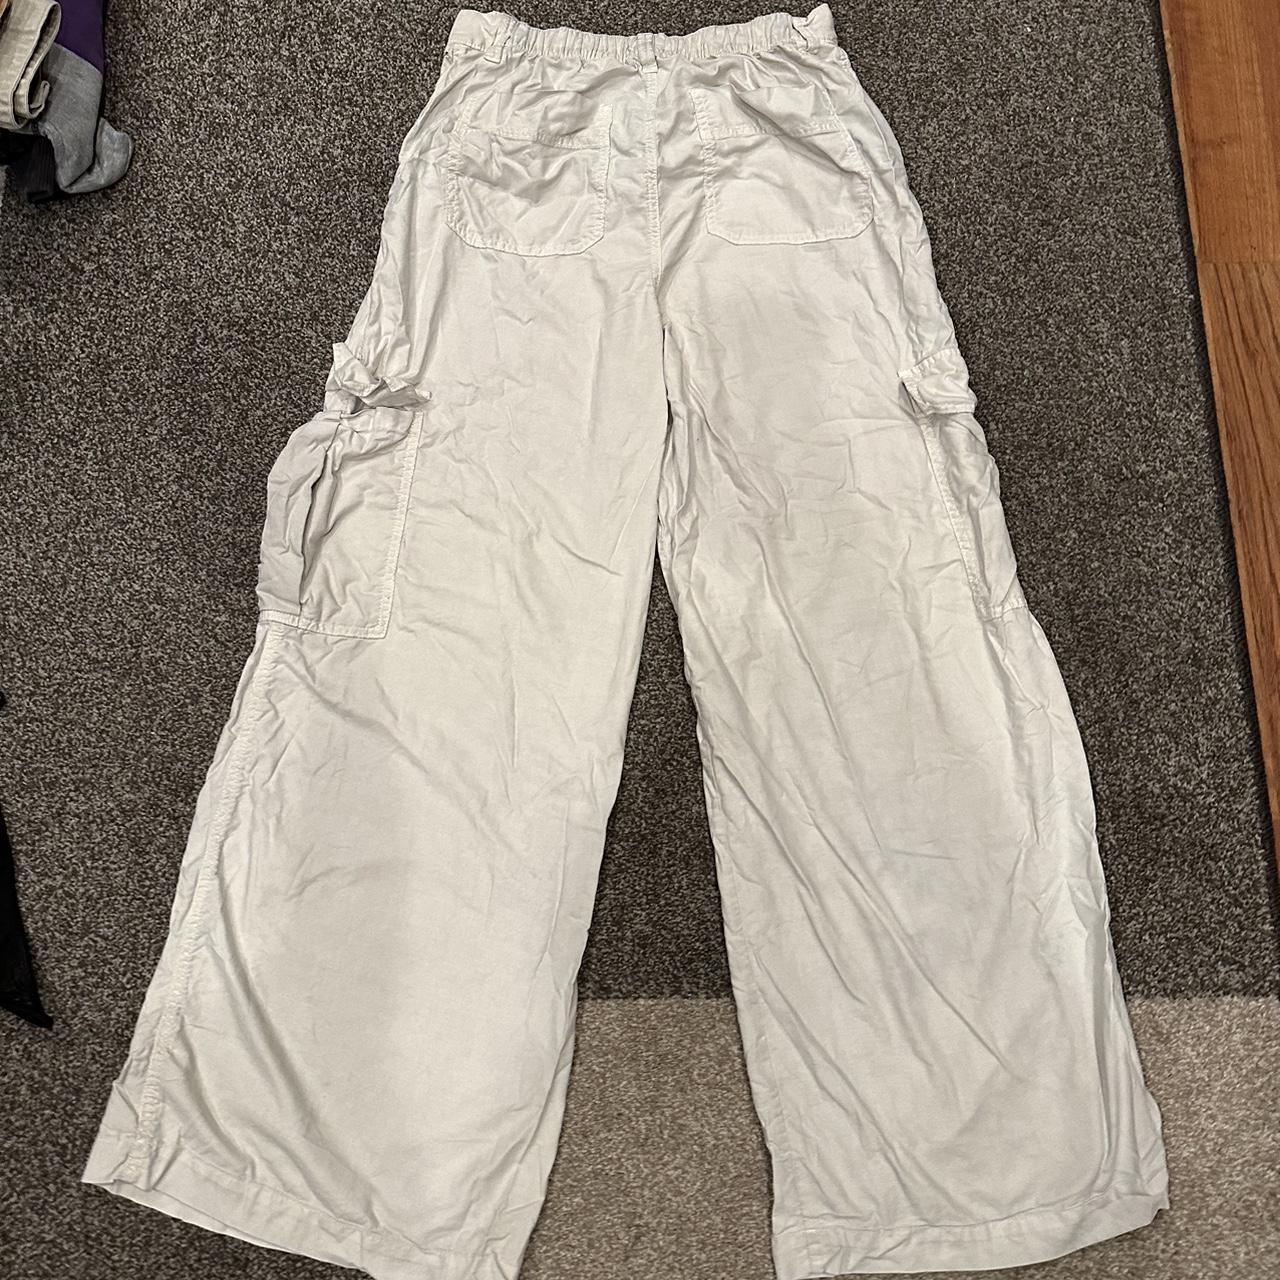 Wide leg cargo pants from garage, these are a... - Depop